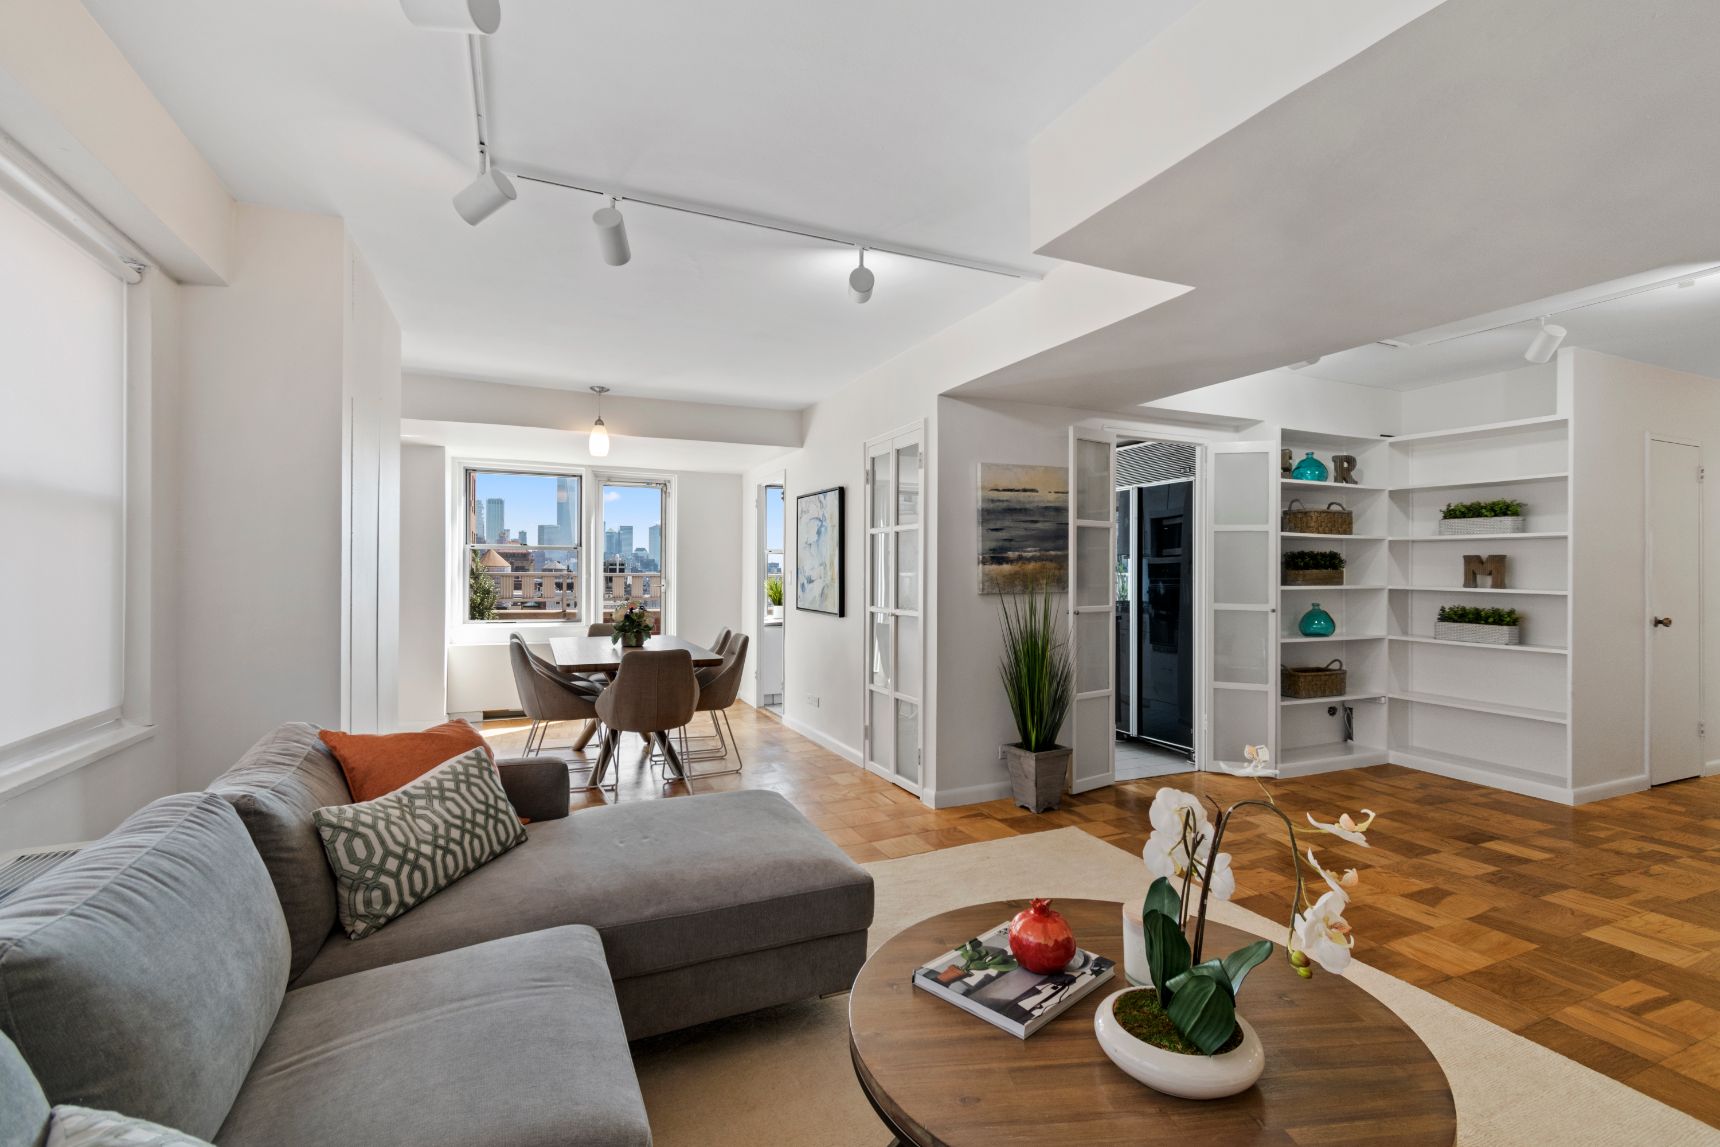 How Much Does a Two Bedroom Apartment Cost to Buy in NYC